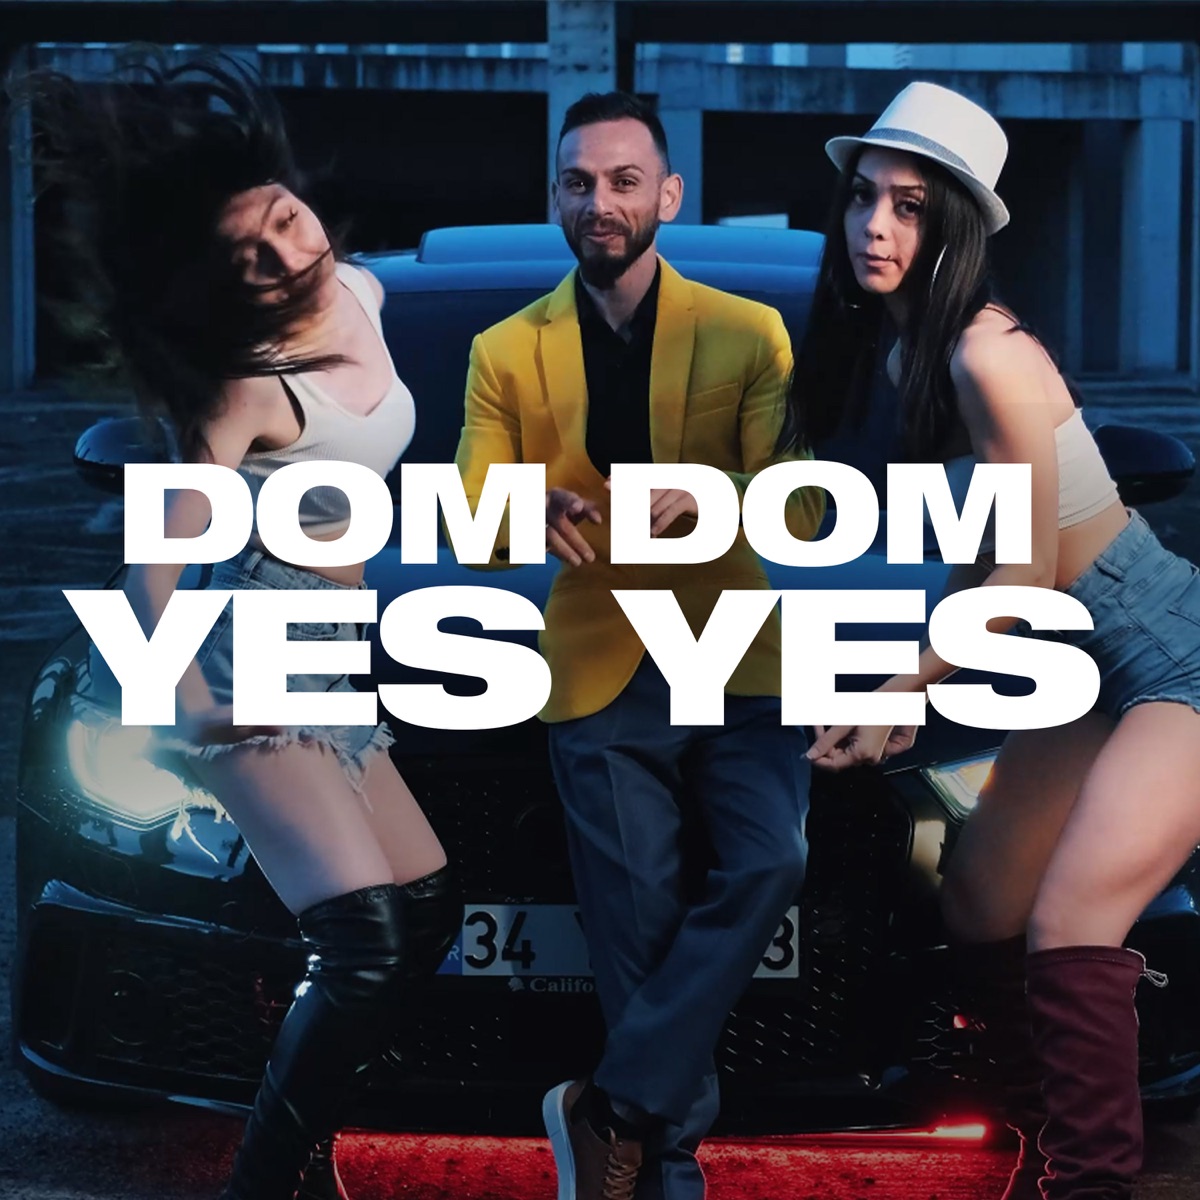 Dom Dom Yes Yes - Song by O Rei do Faroeste - Apple Music